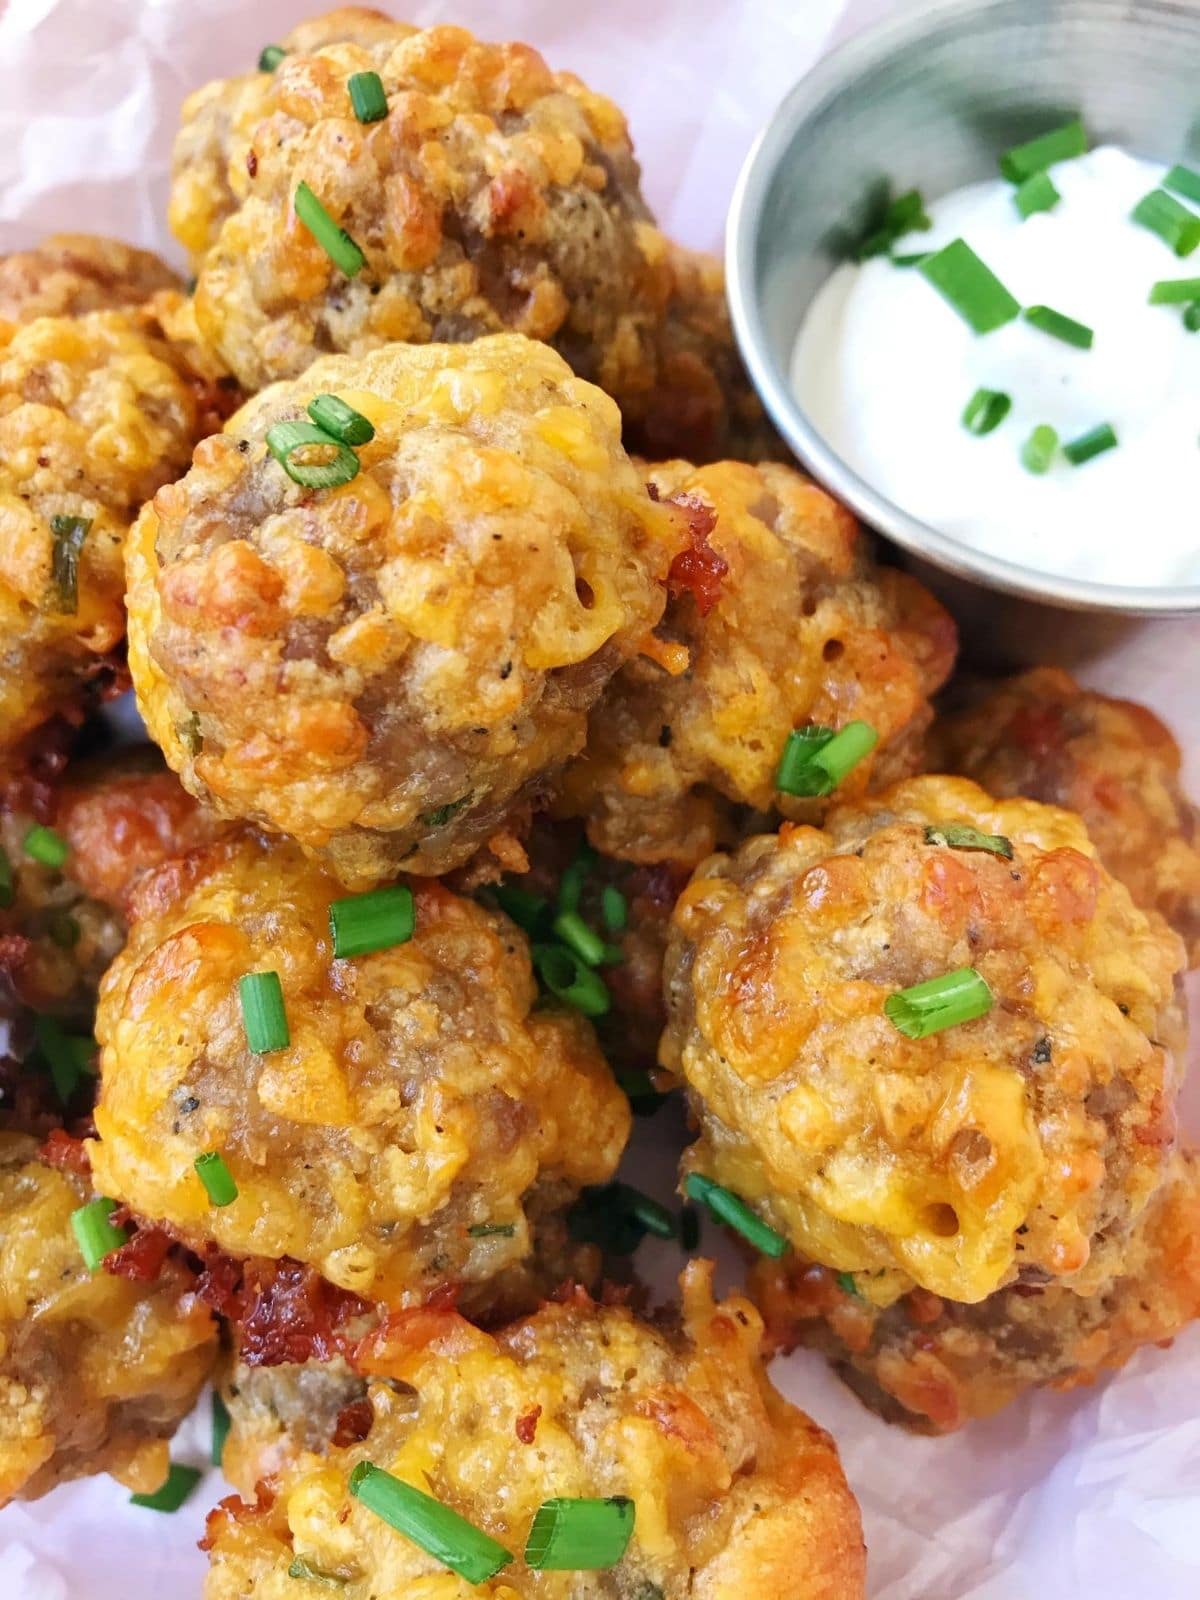 sausage balls piled on a plate